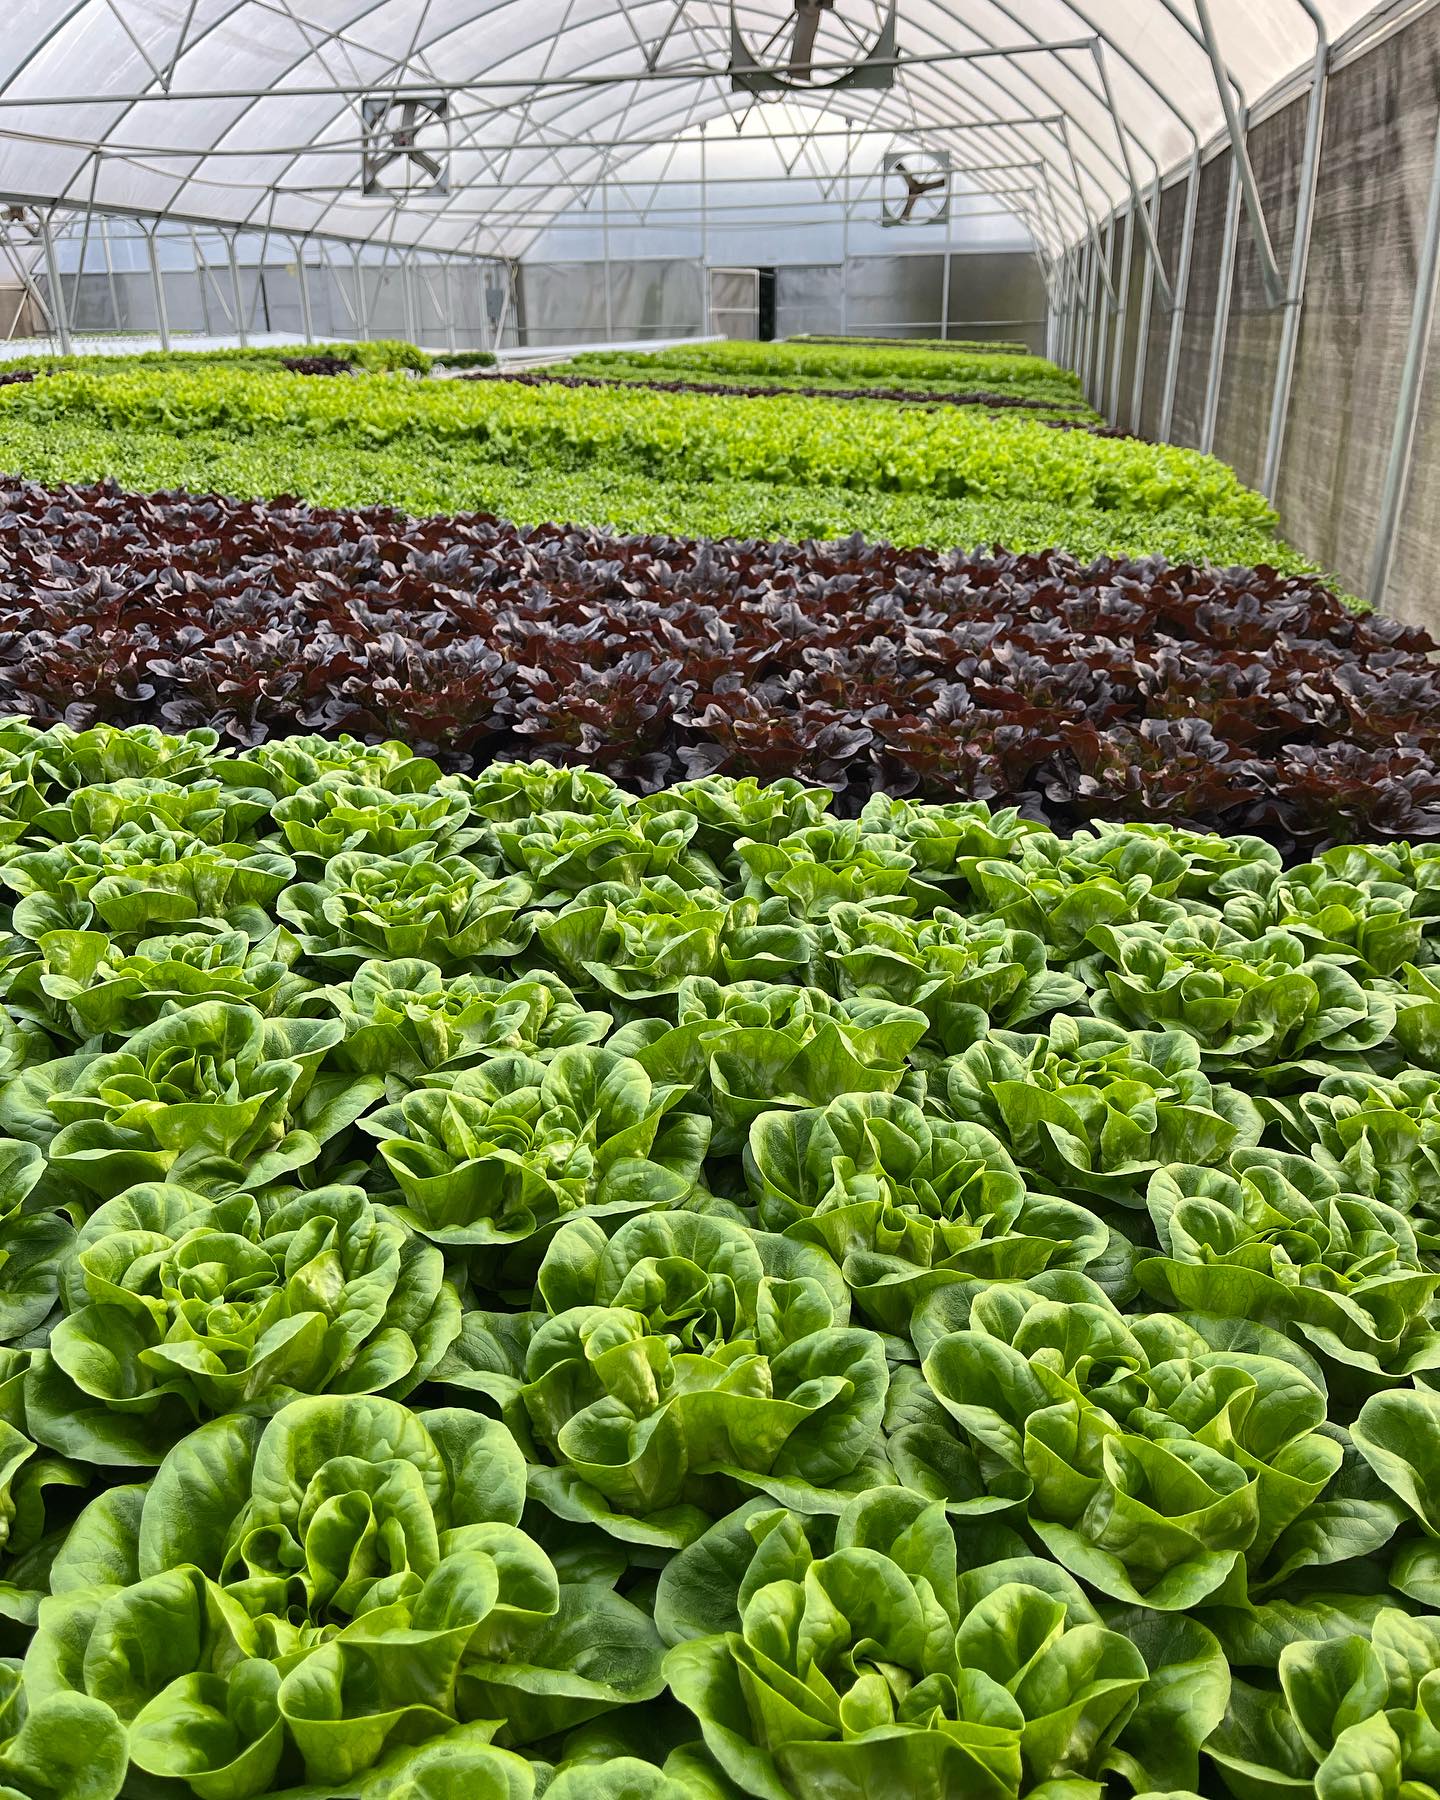 Featured image for “Hydroponic Lettuce: More Efficient Production”